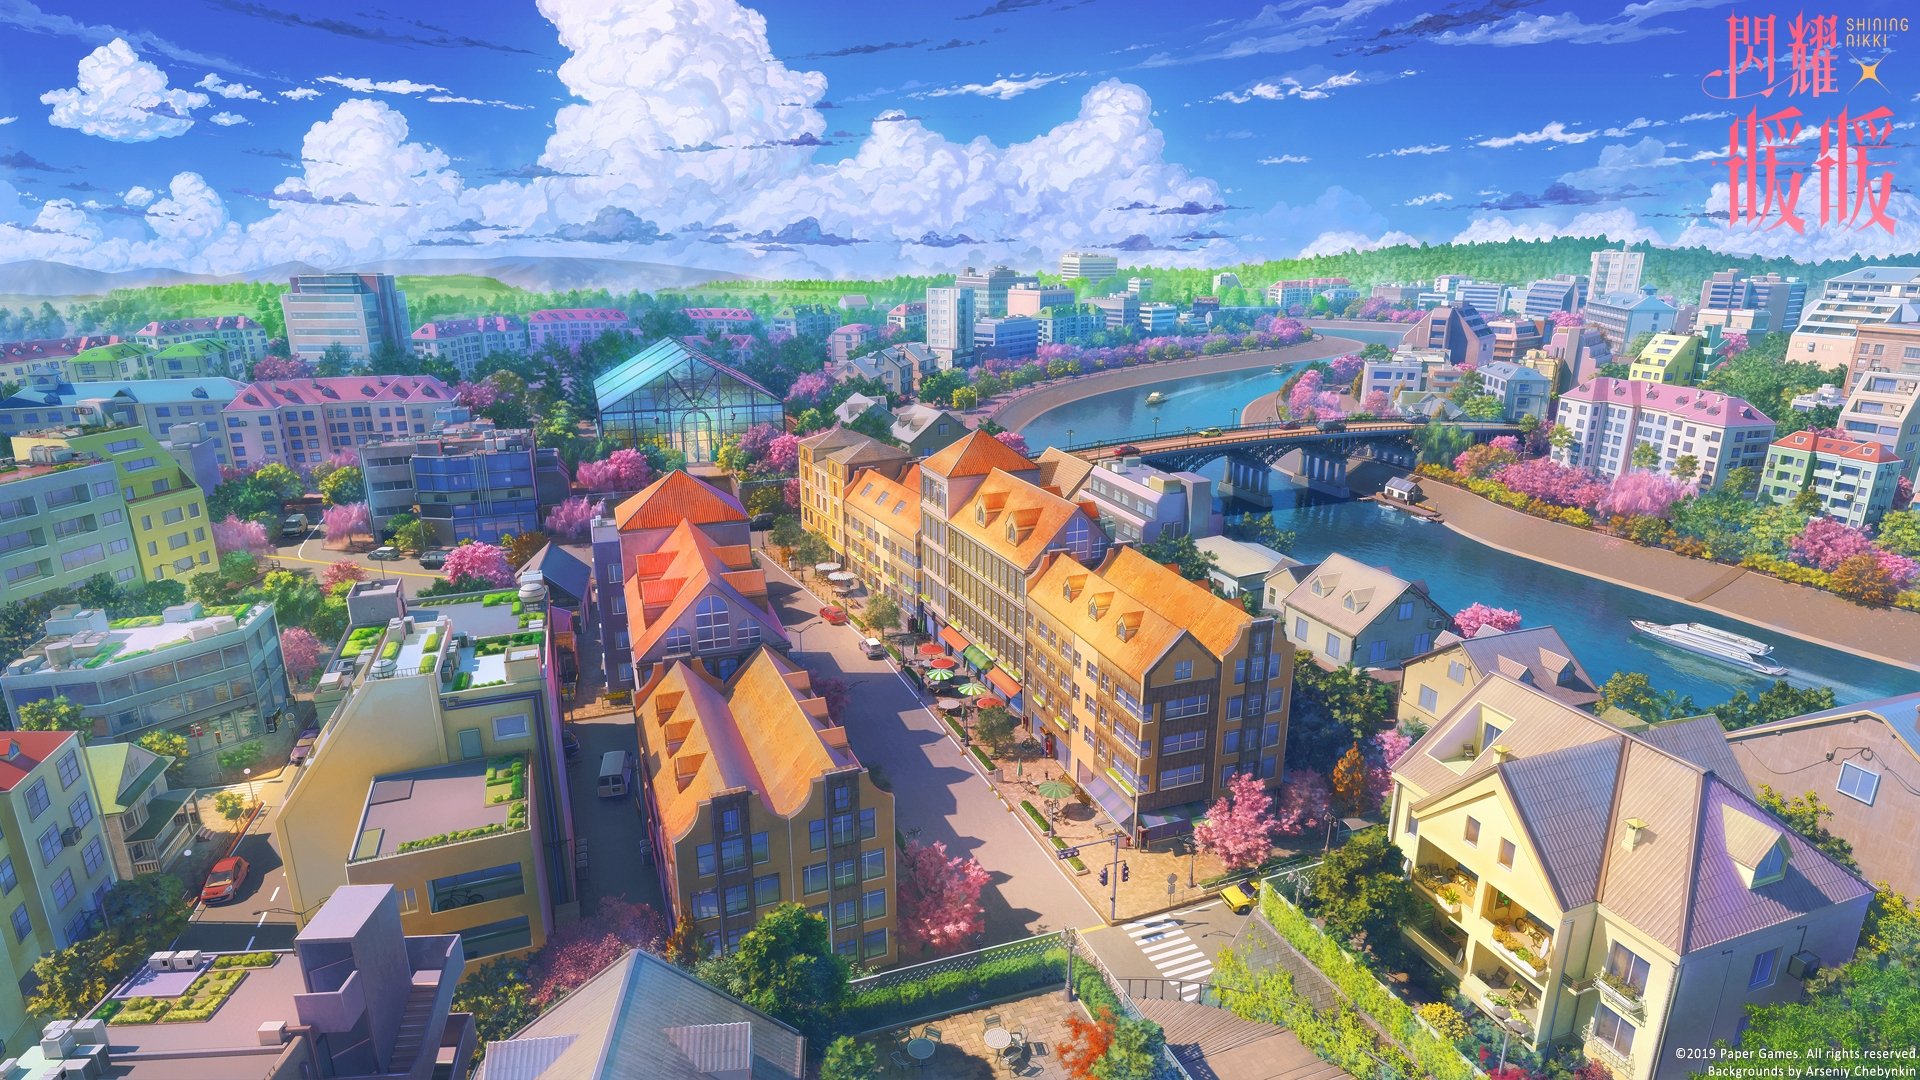 Download 1920x1080 Anime Cityscape, Artwork, Buildings, Toon Shading, Clouds, Slice Of Life Wallpaper for Widescreen